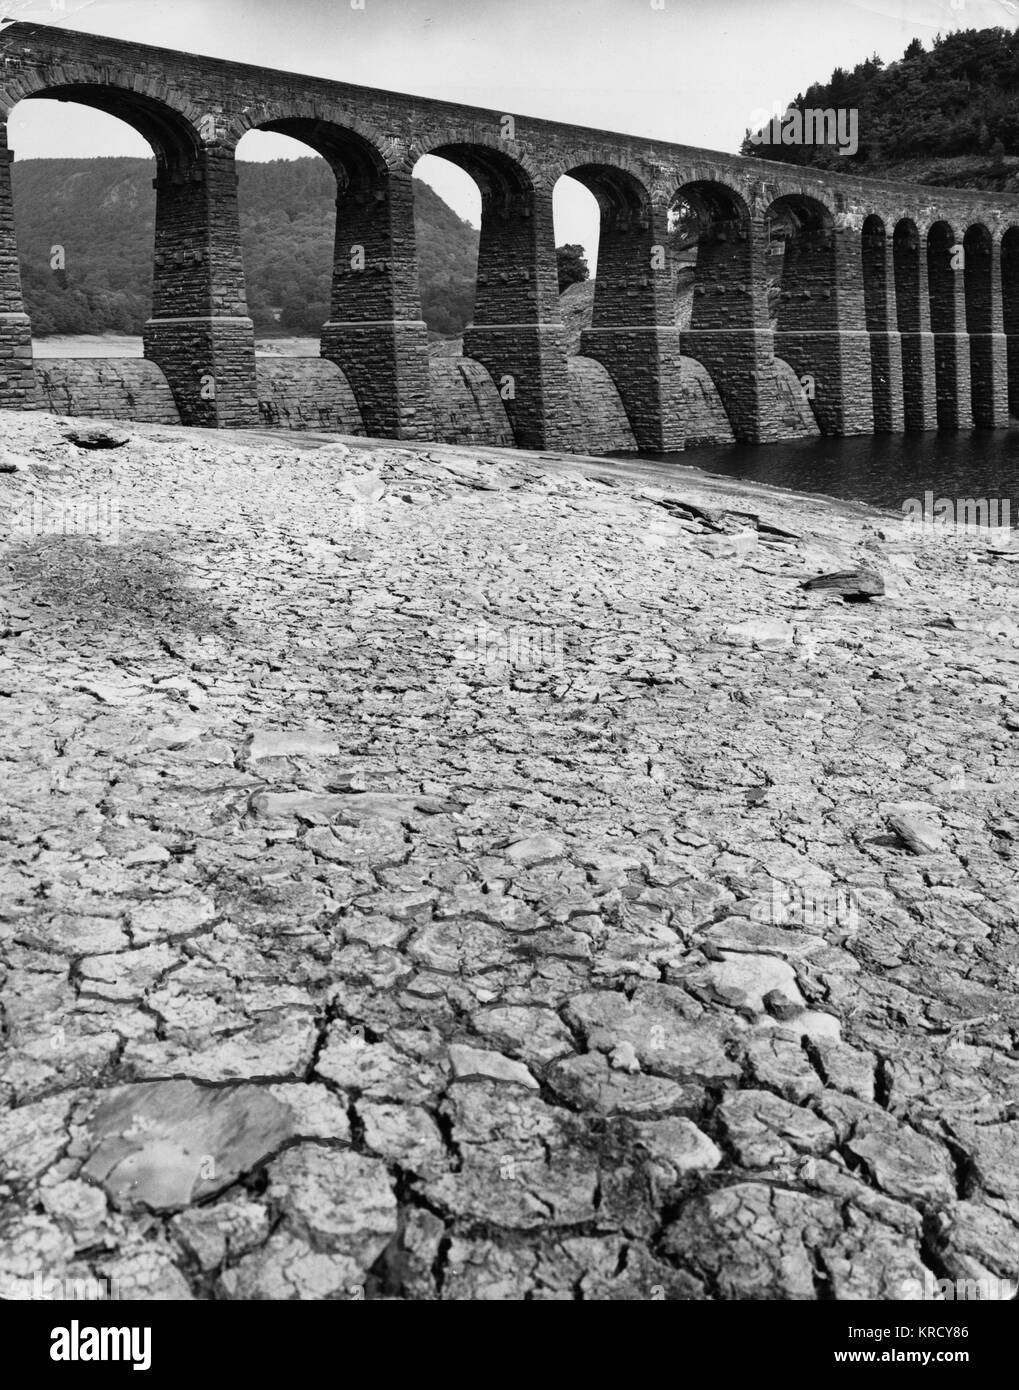 Garreg-ddu, one of the Elan Valley dams in Wales, dried out during the hot summer drought of 1976. Stock Photo